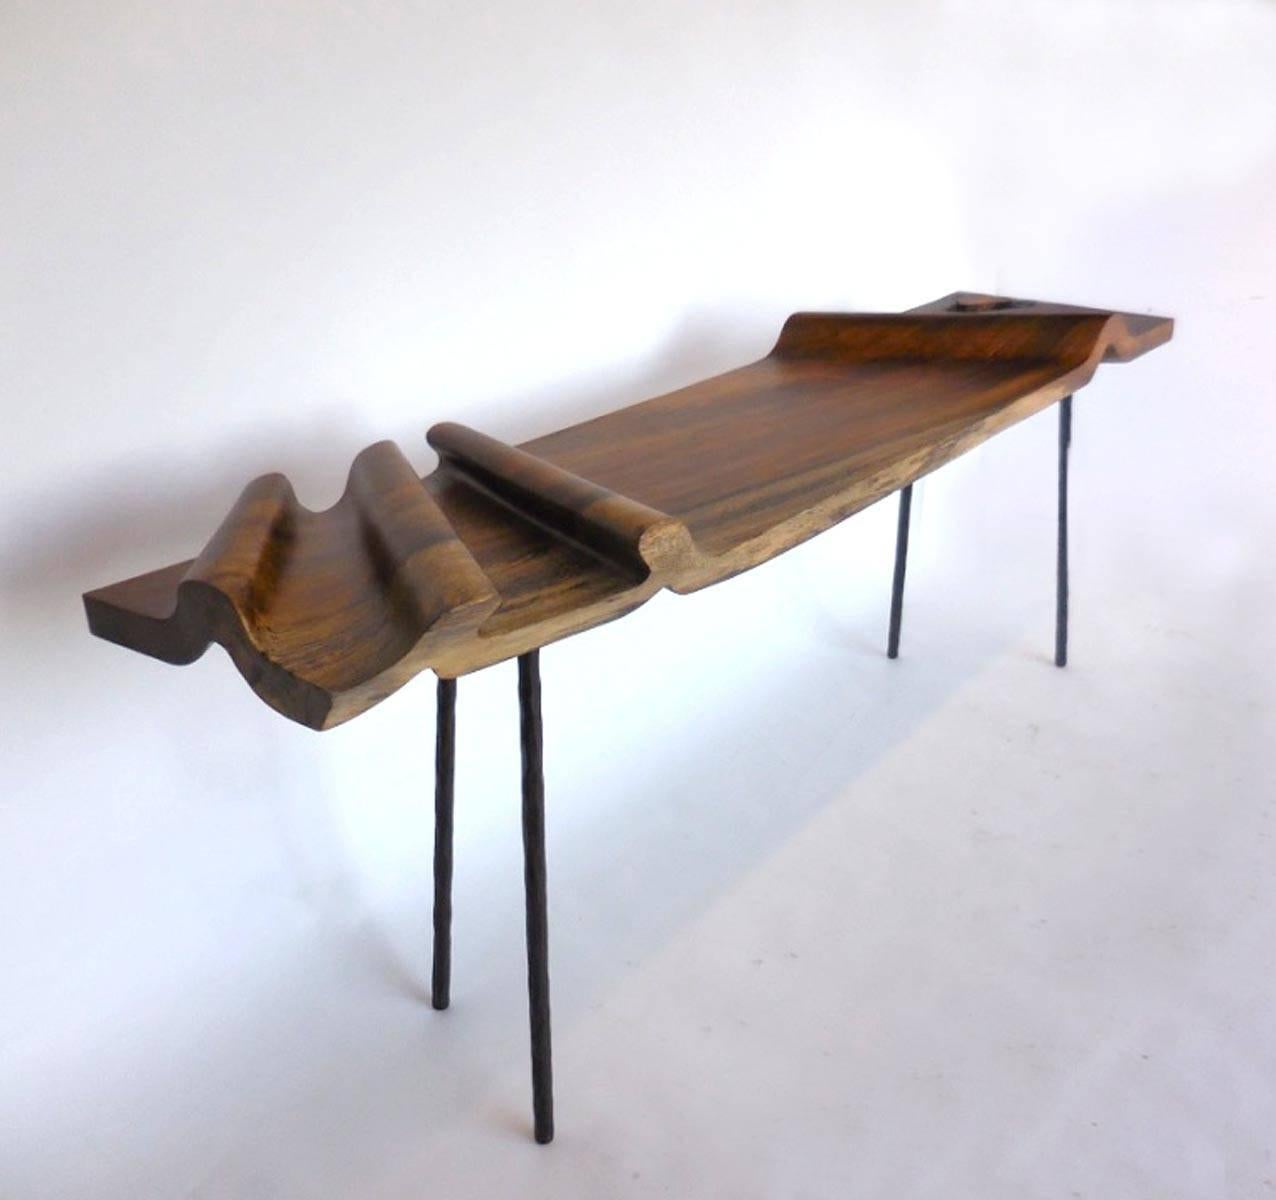 Top carved out of five inch thick topical conacaste wood, creating an undulating two inch top reminiscent of an unbolted roll of fabric.
Hand-forged custom iron legs. 